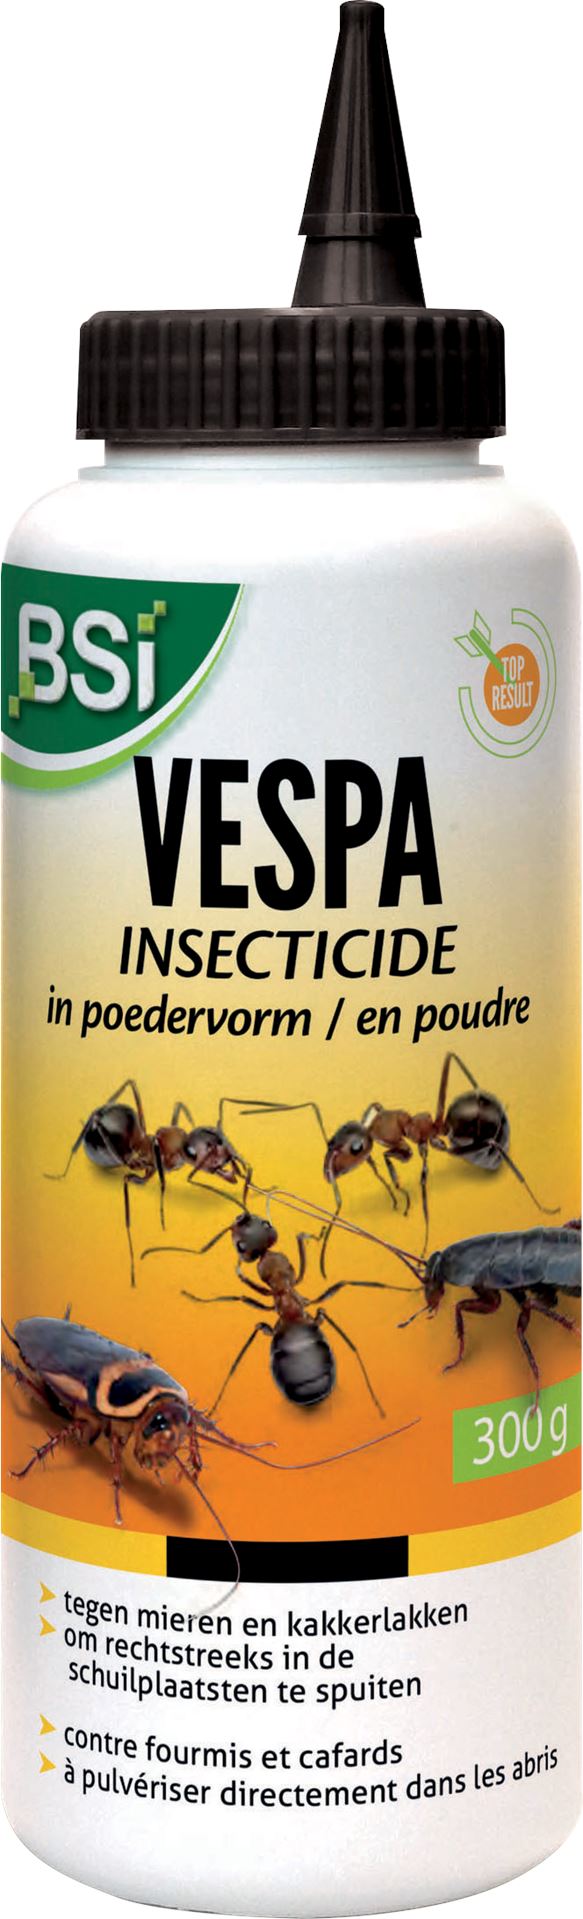 Vespa-Insecticide-BSI-300-g-BE-LU